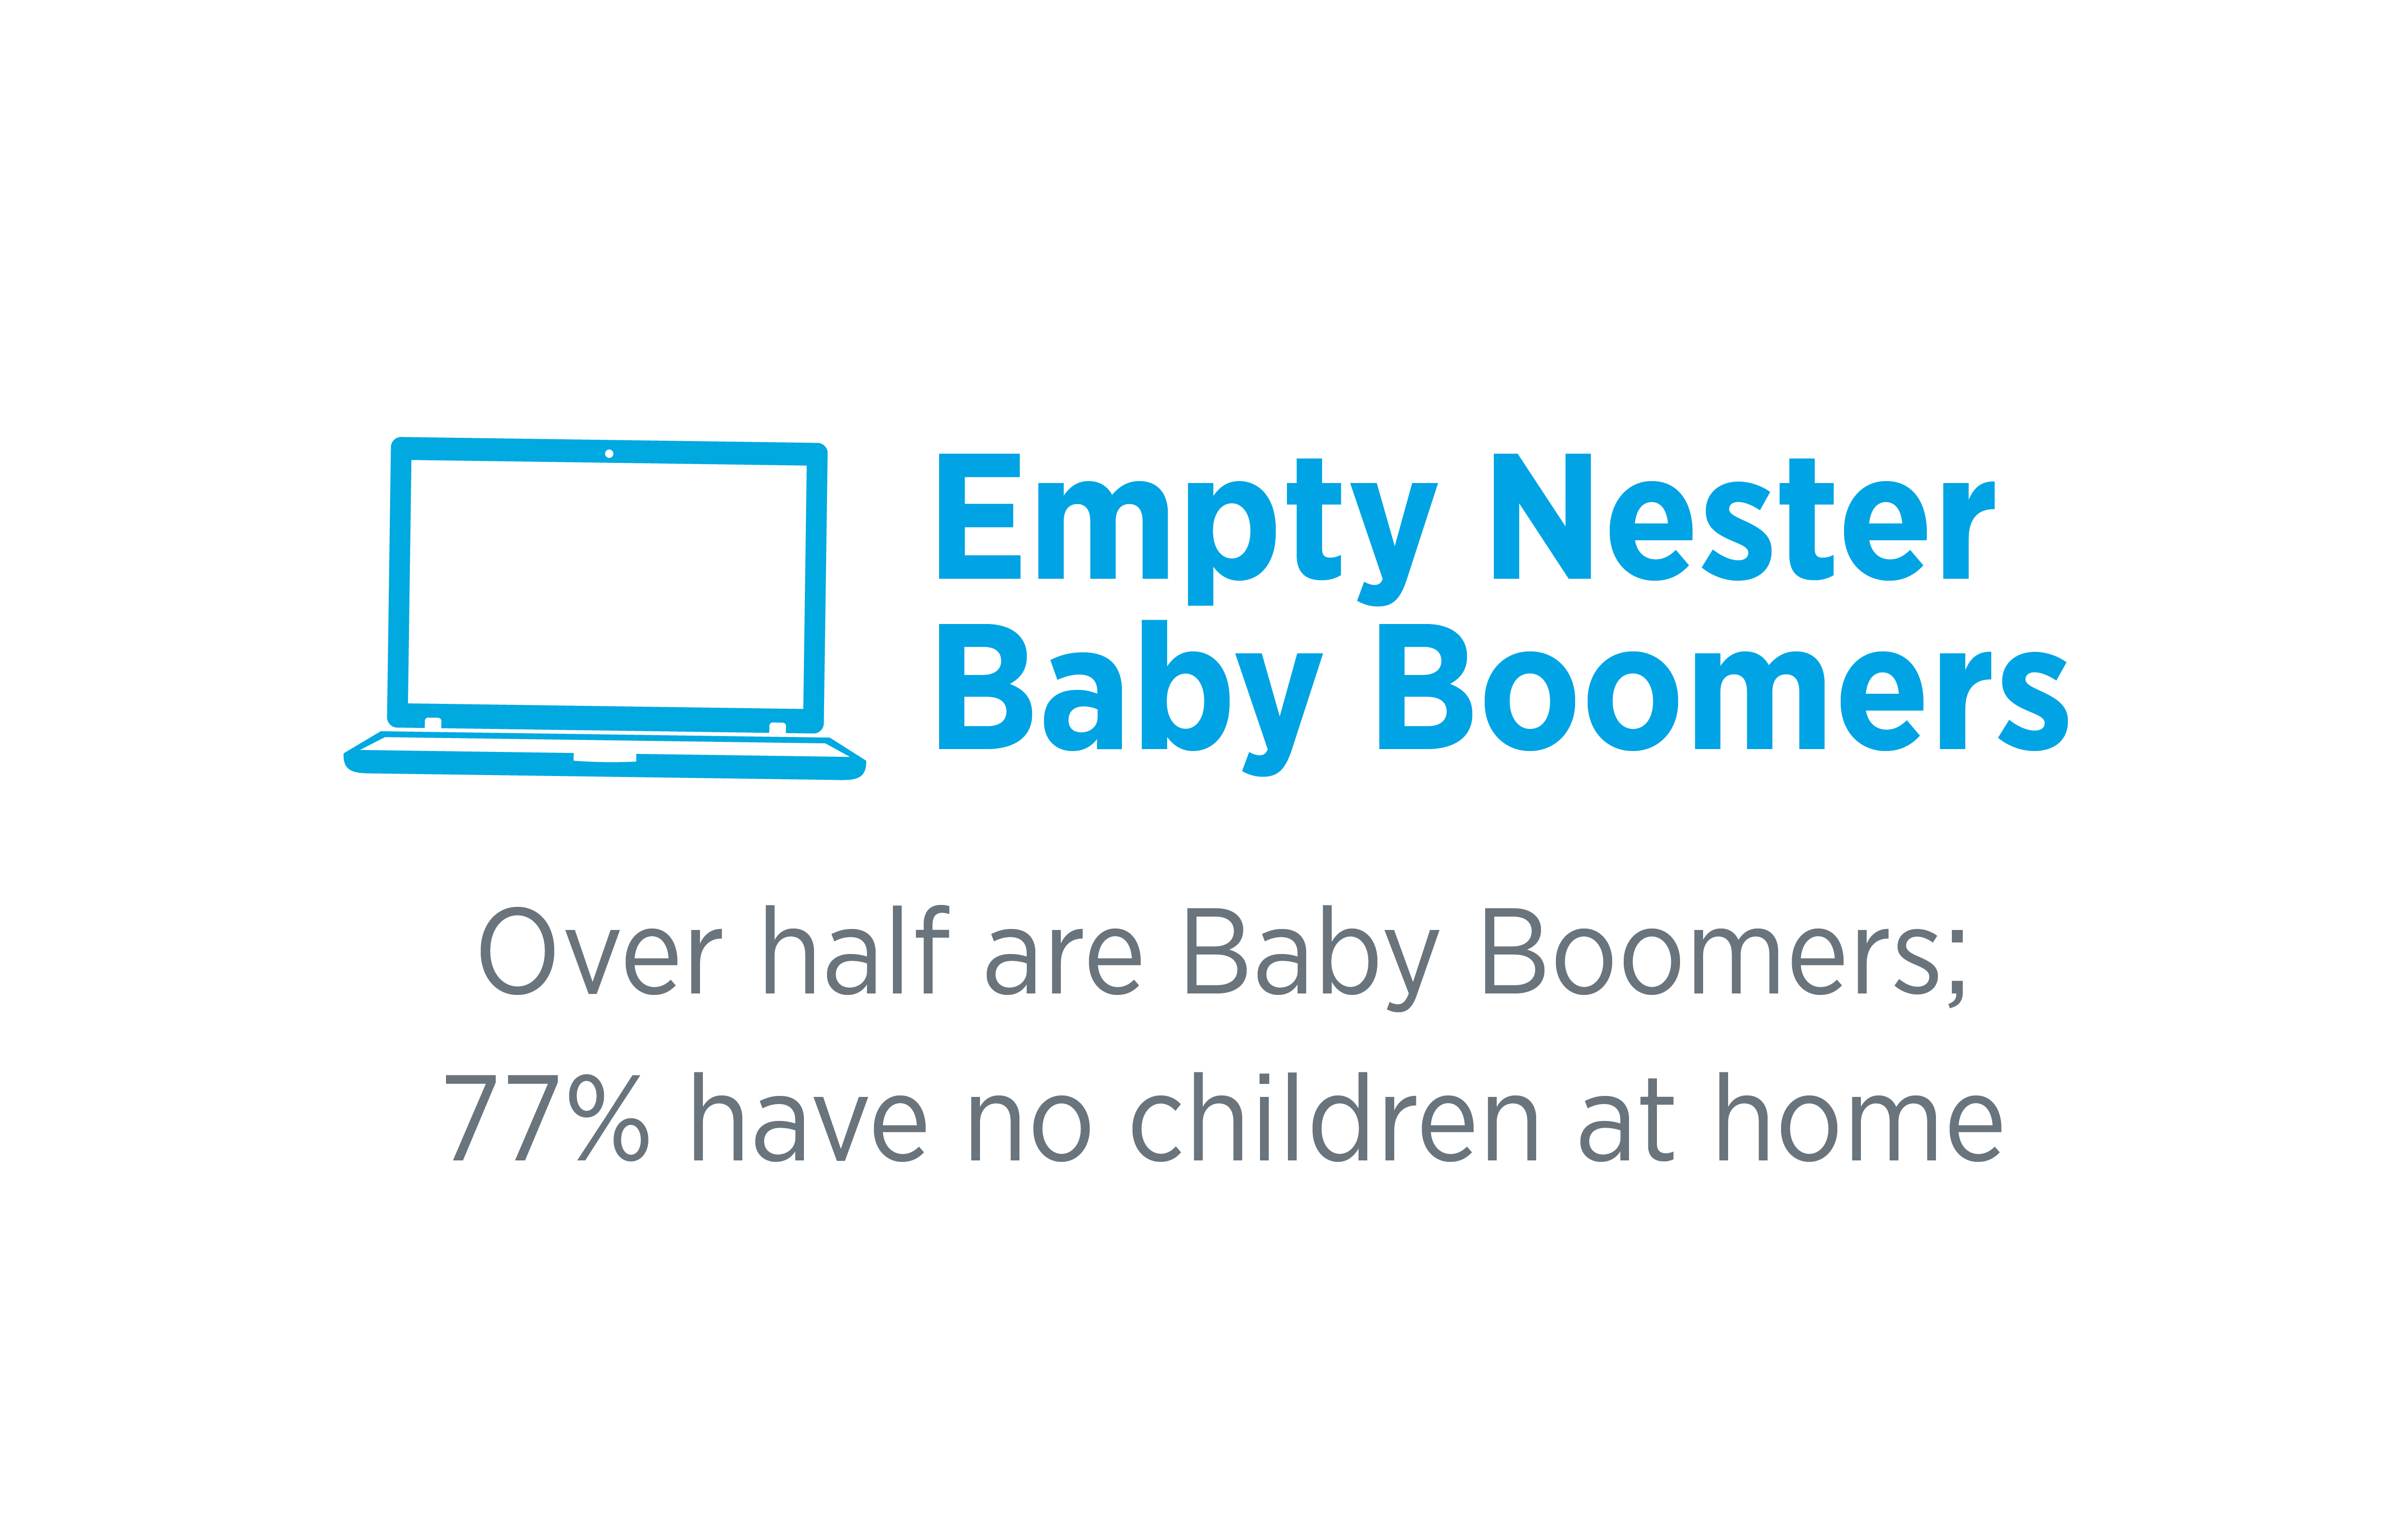 over half are baby boomers: 77% have no children at home.